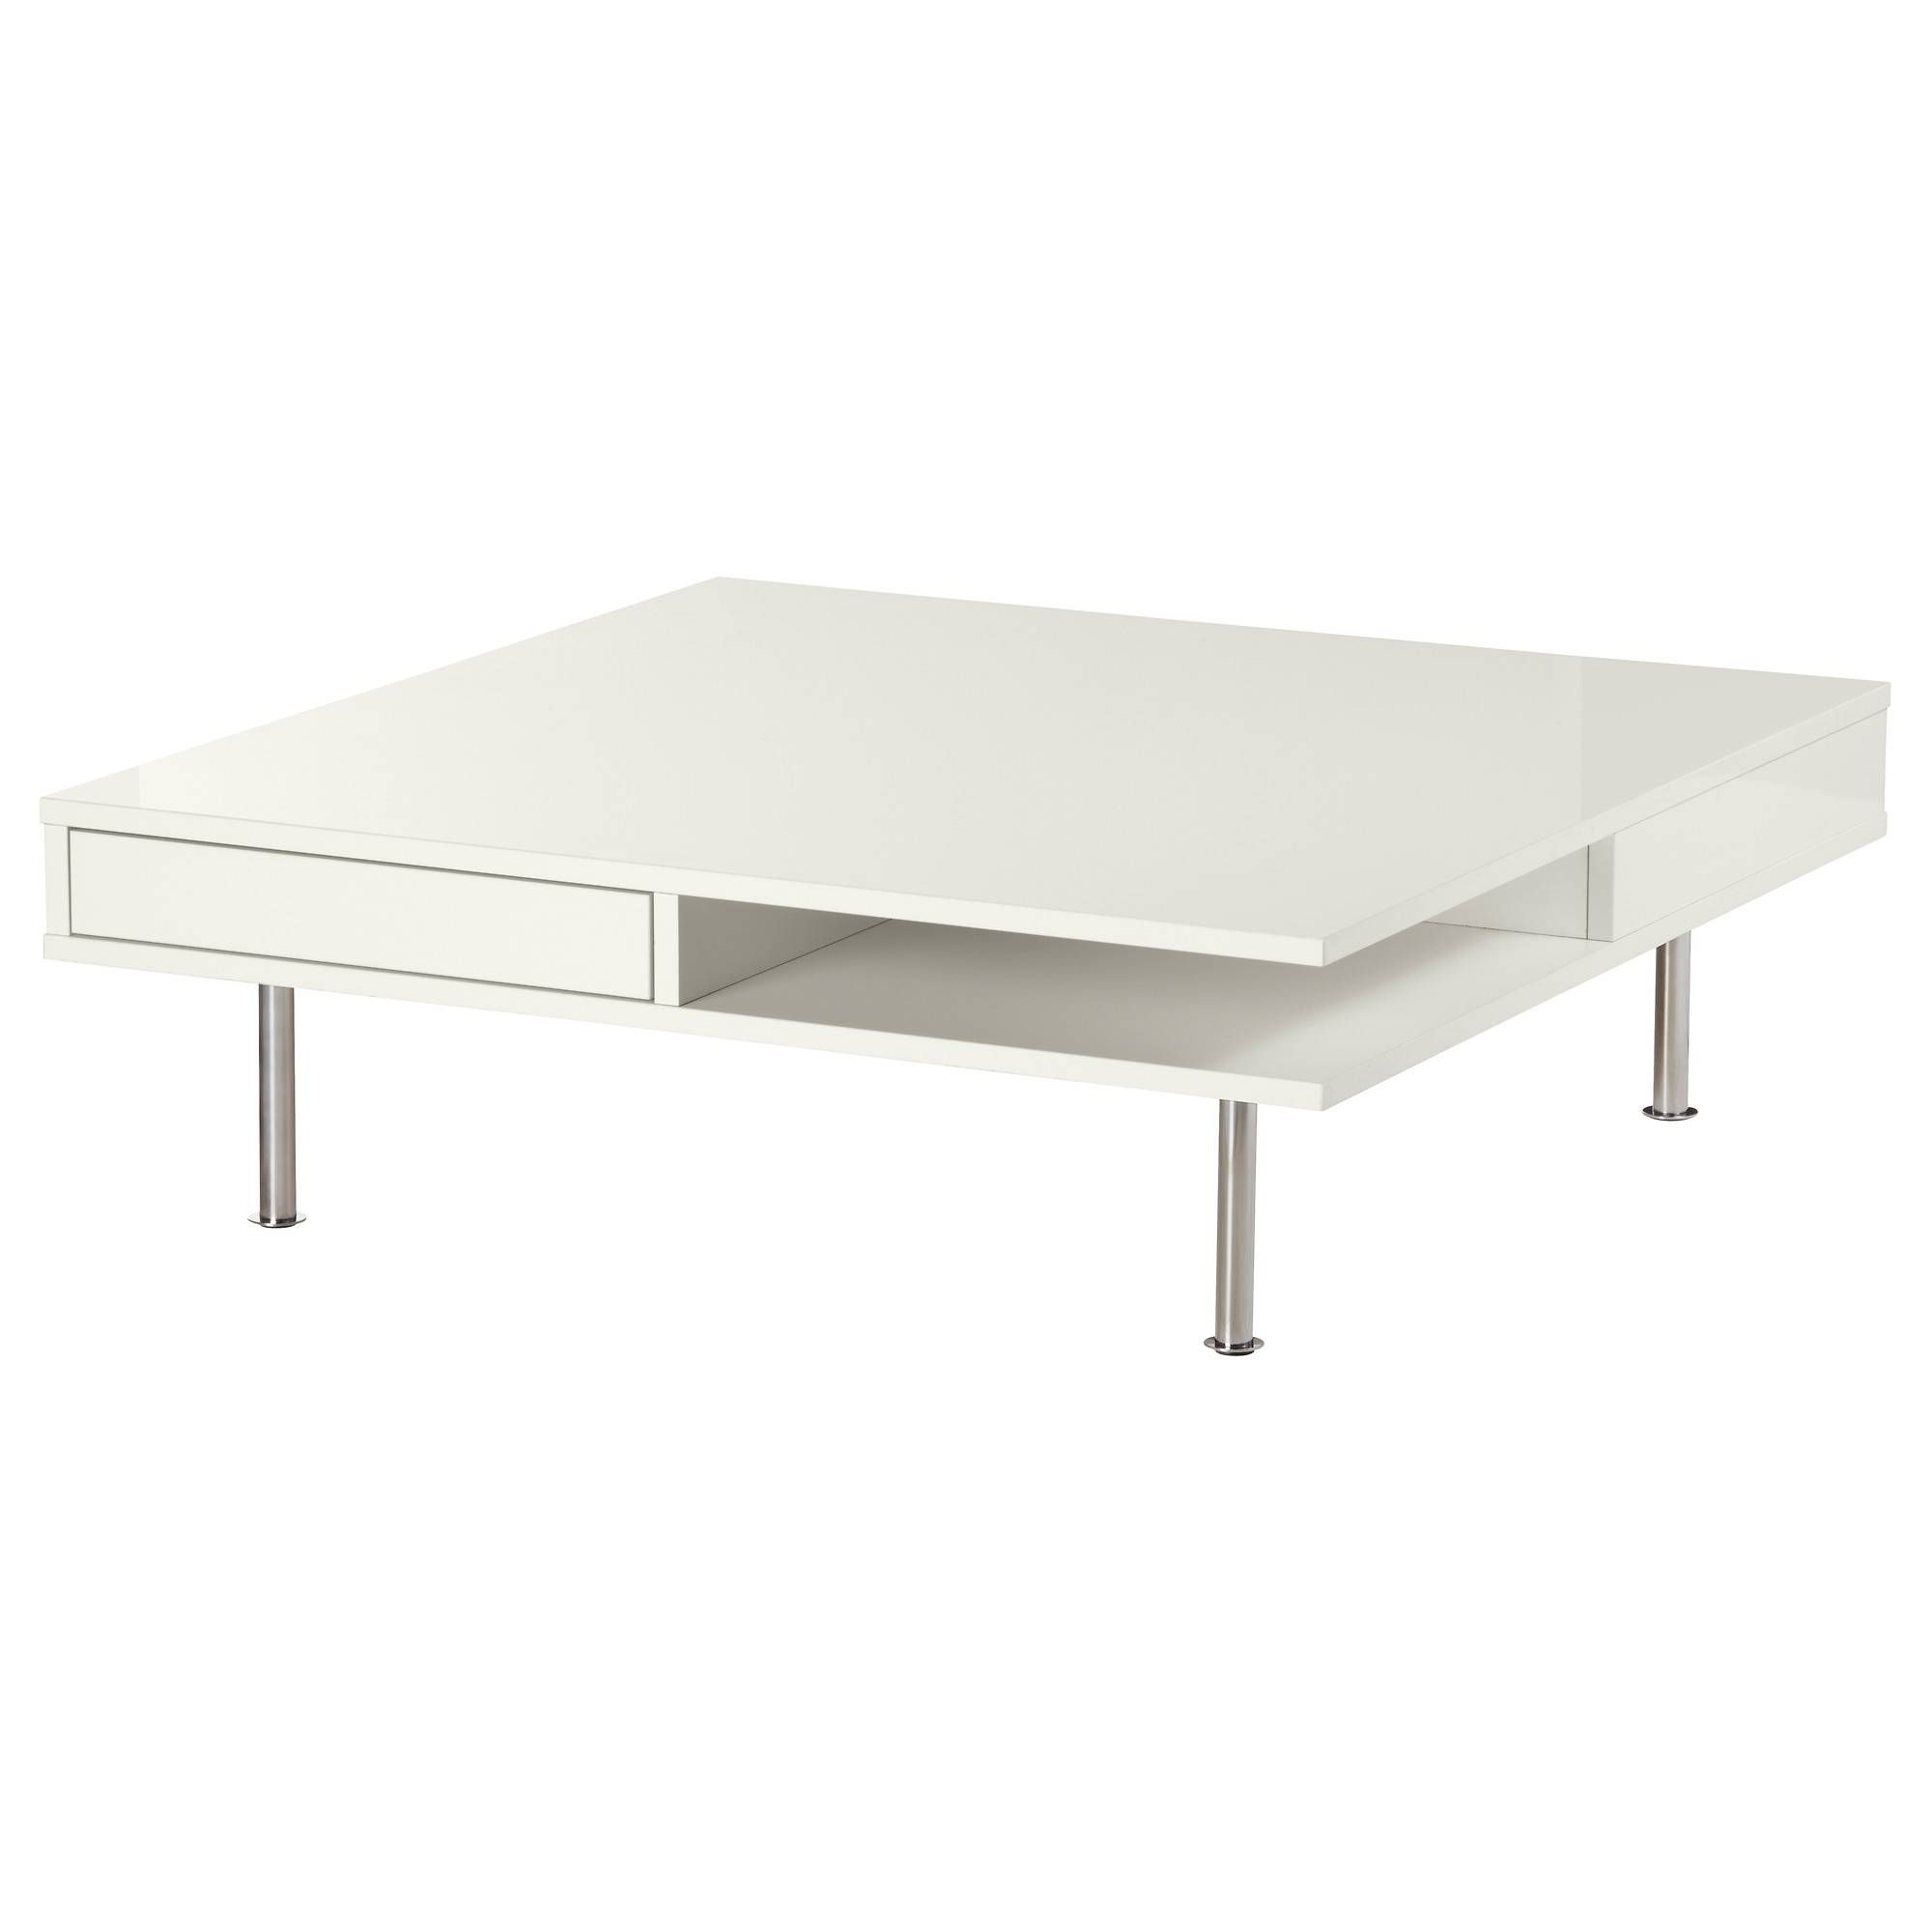 Tofteryd Coffee Table High Gloss White 95x95 Cm – Ikea In White Gloss Coffee Tables (View 23 of 30)